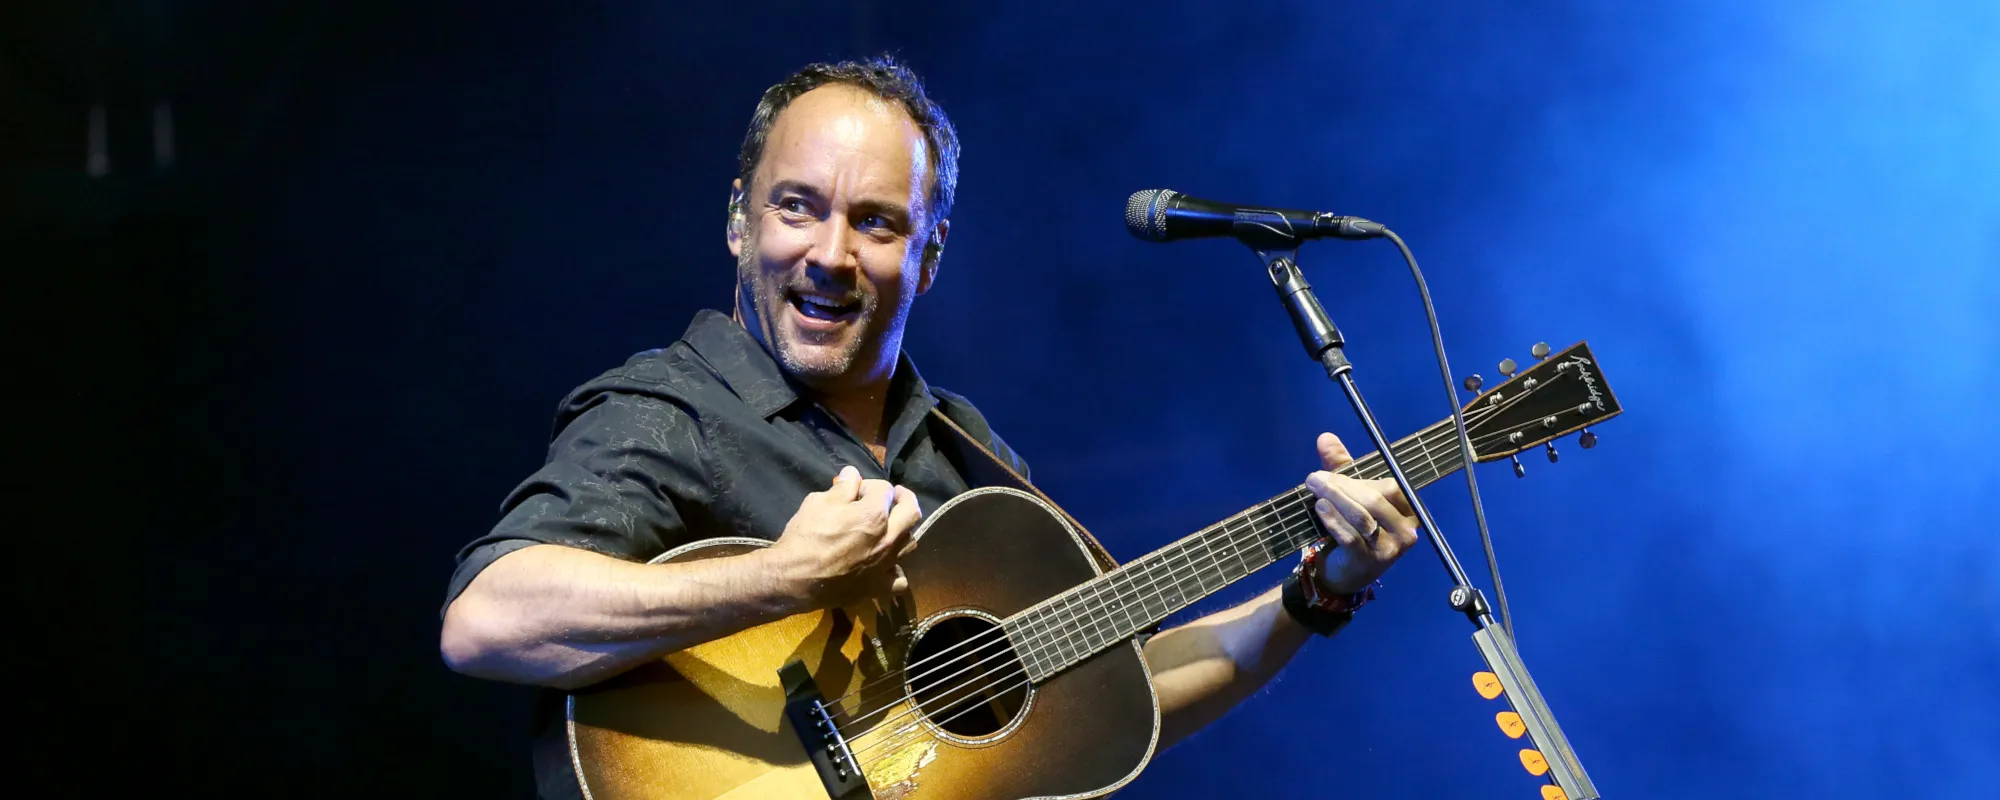 Behind The Song: “Crash Into Me” by Dave Matthews Band